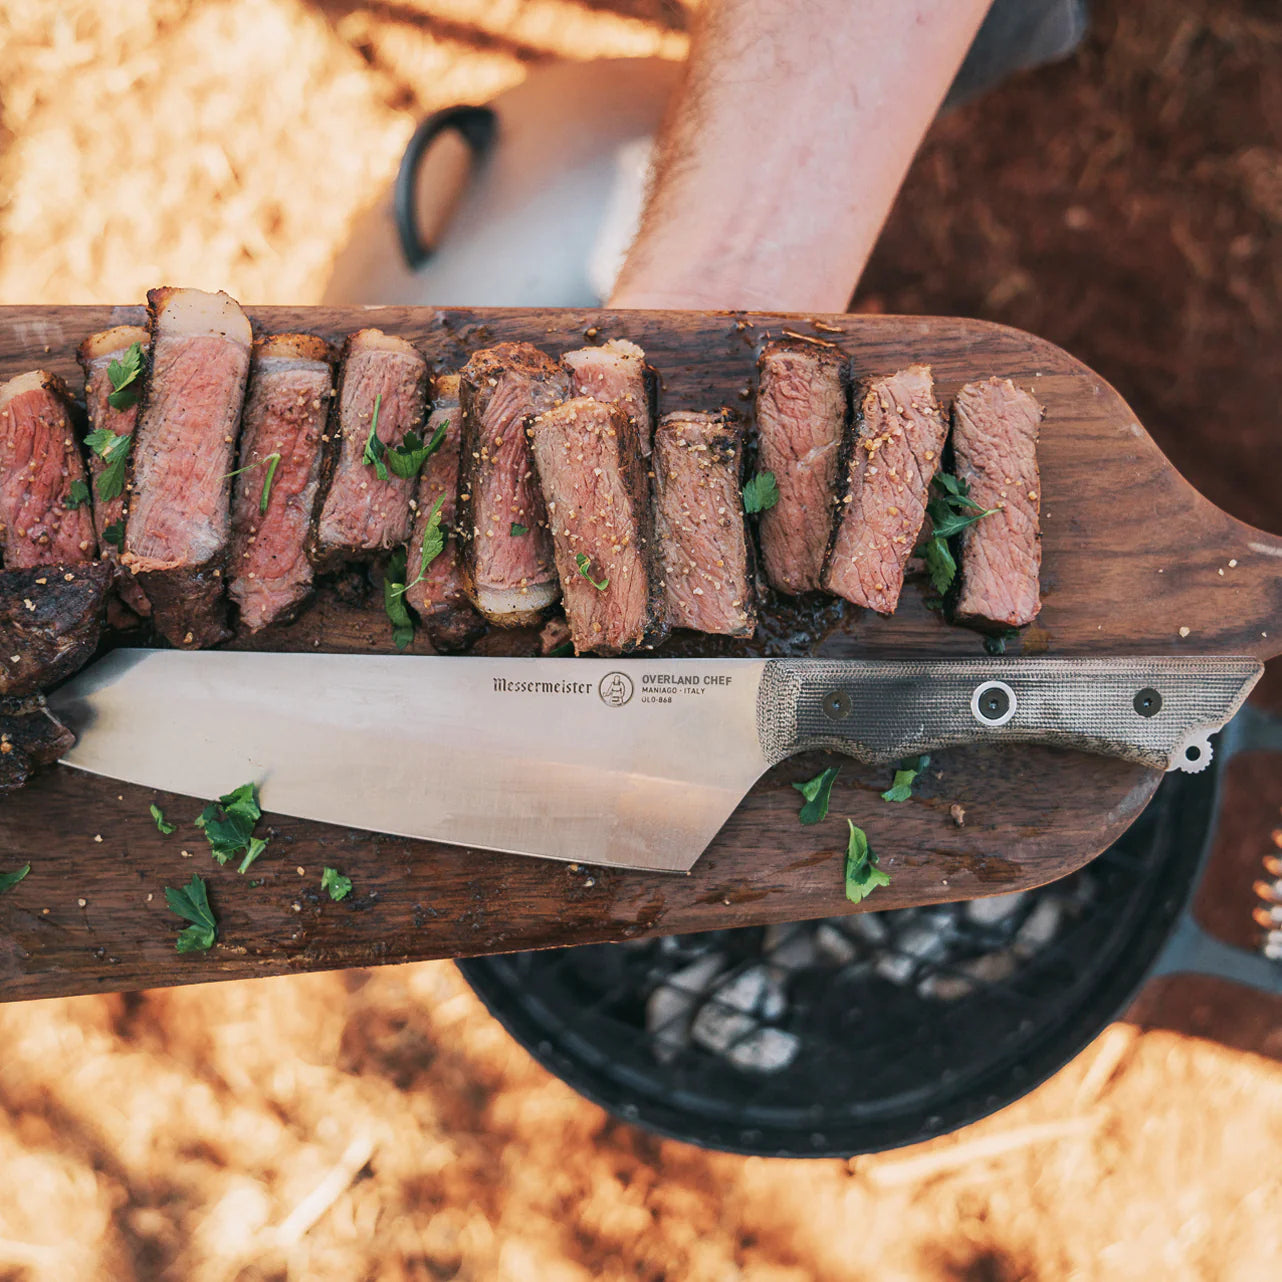 Overland Chef 8-Inch Chef Knife